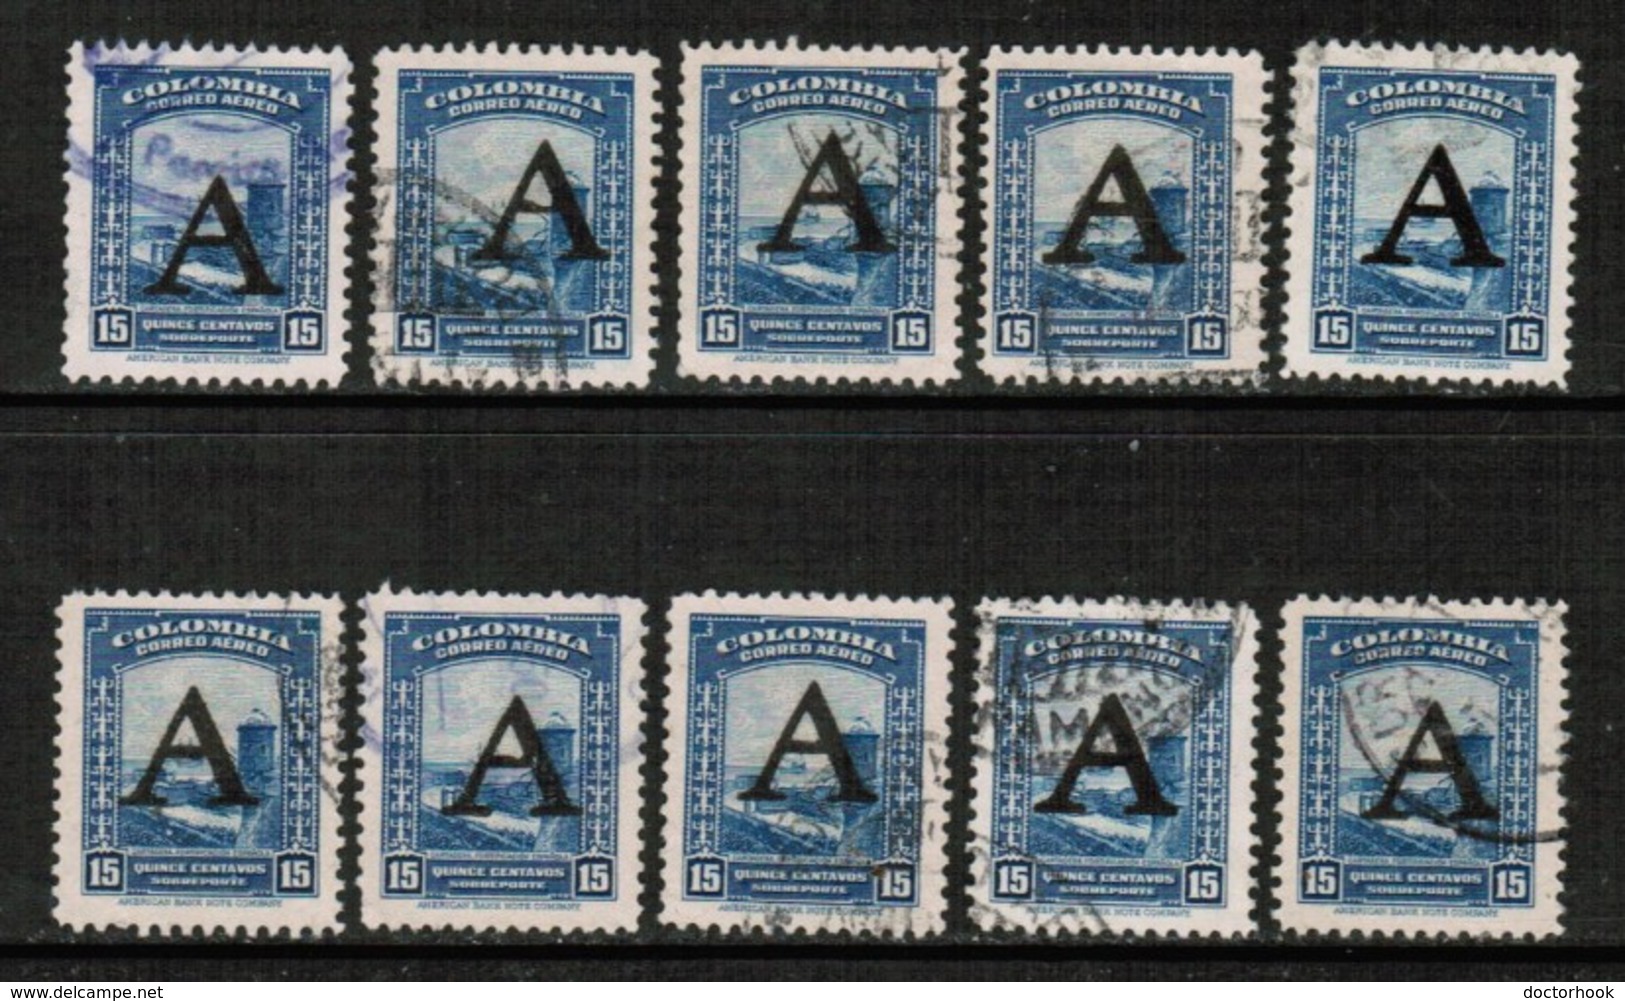 COLOMBIA   Scott # C 188 USED WHOLESALE LOT OF 10 (WH-200) - Vrac (max 999 Timbres)